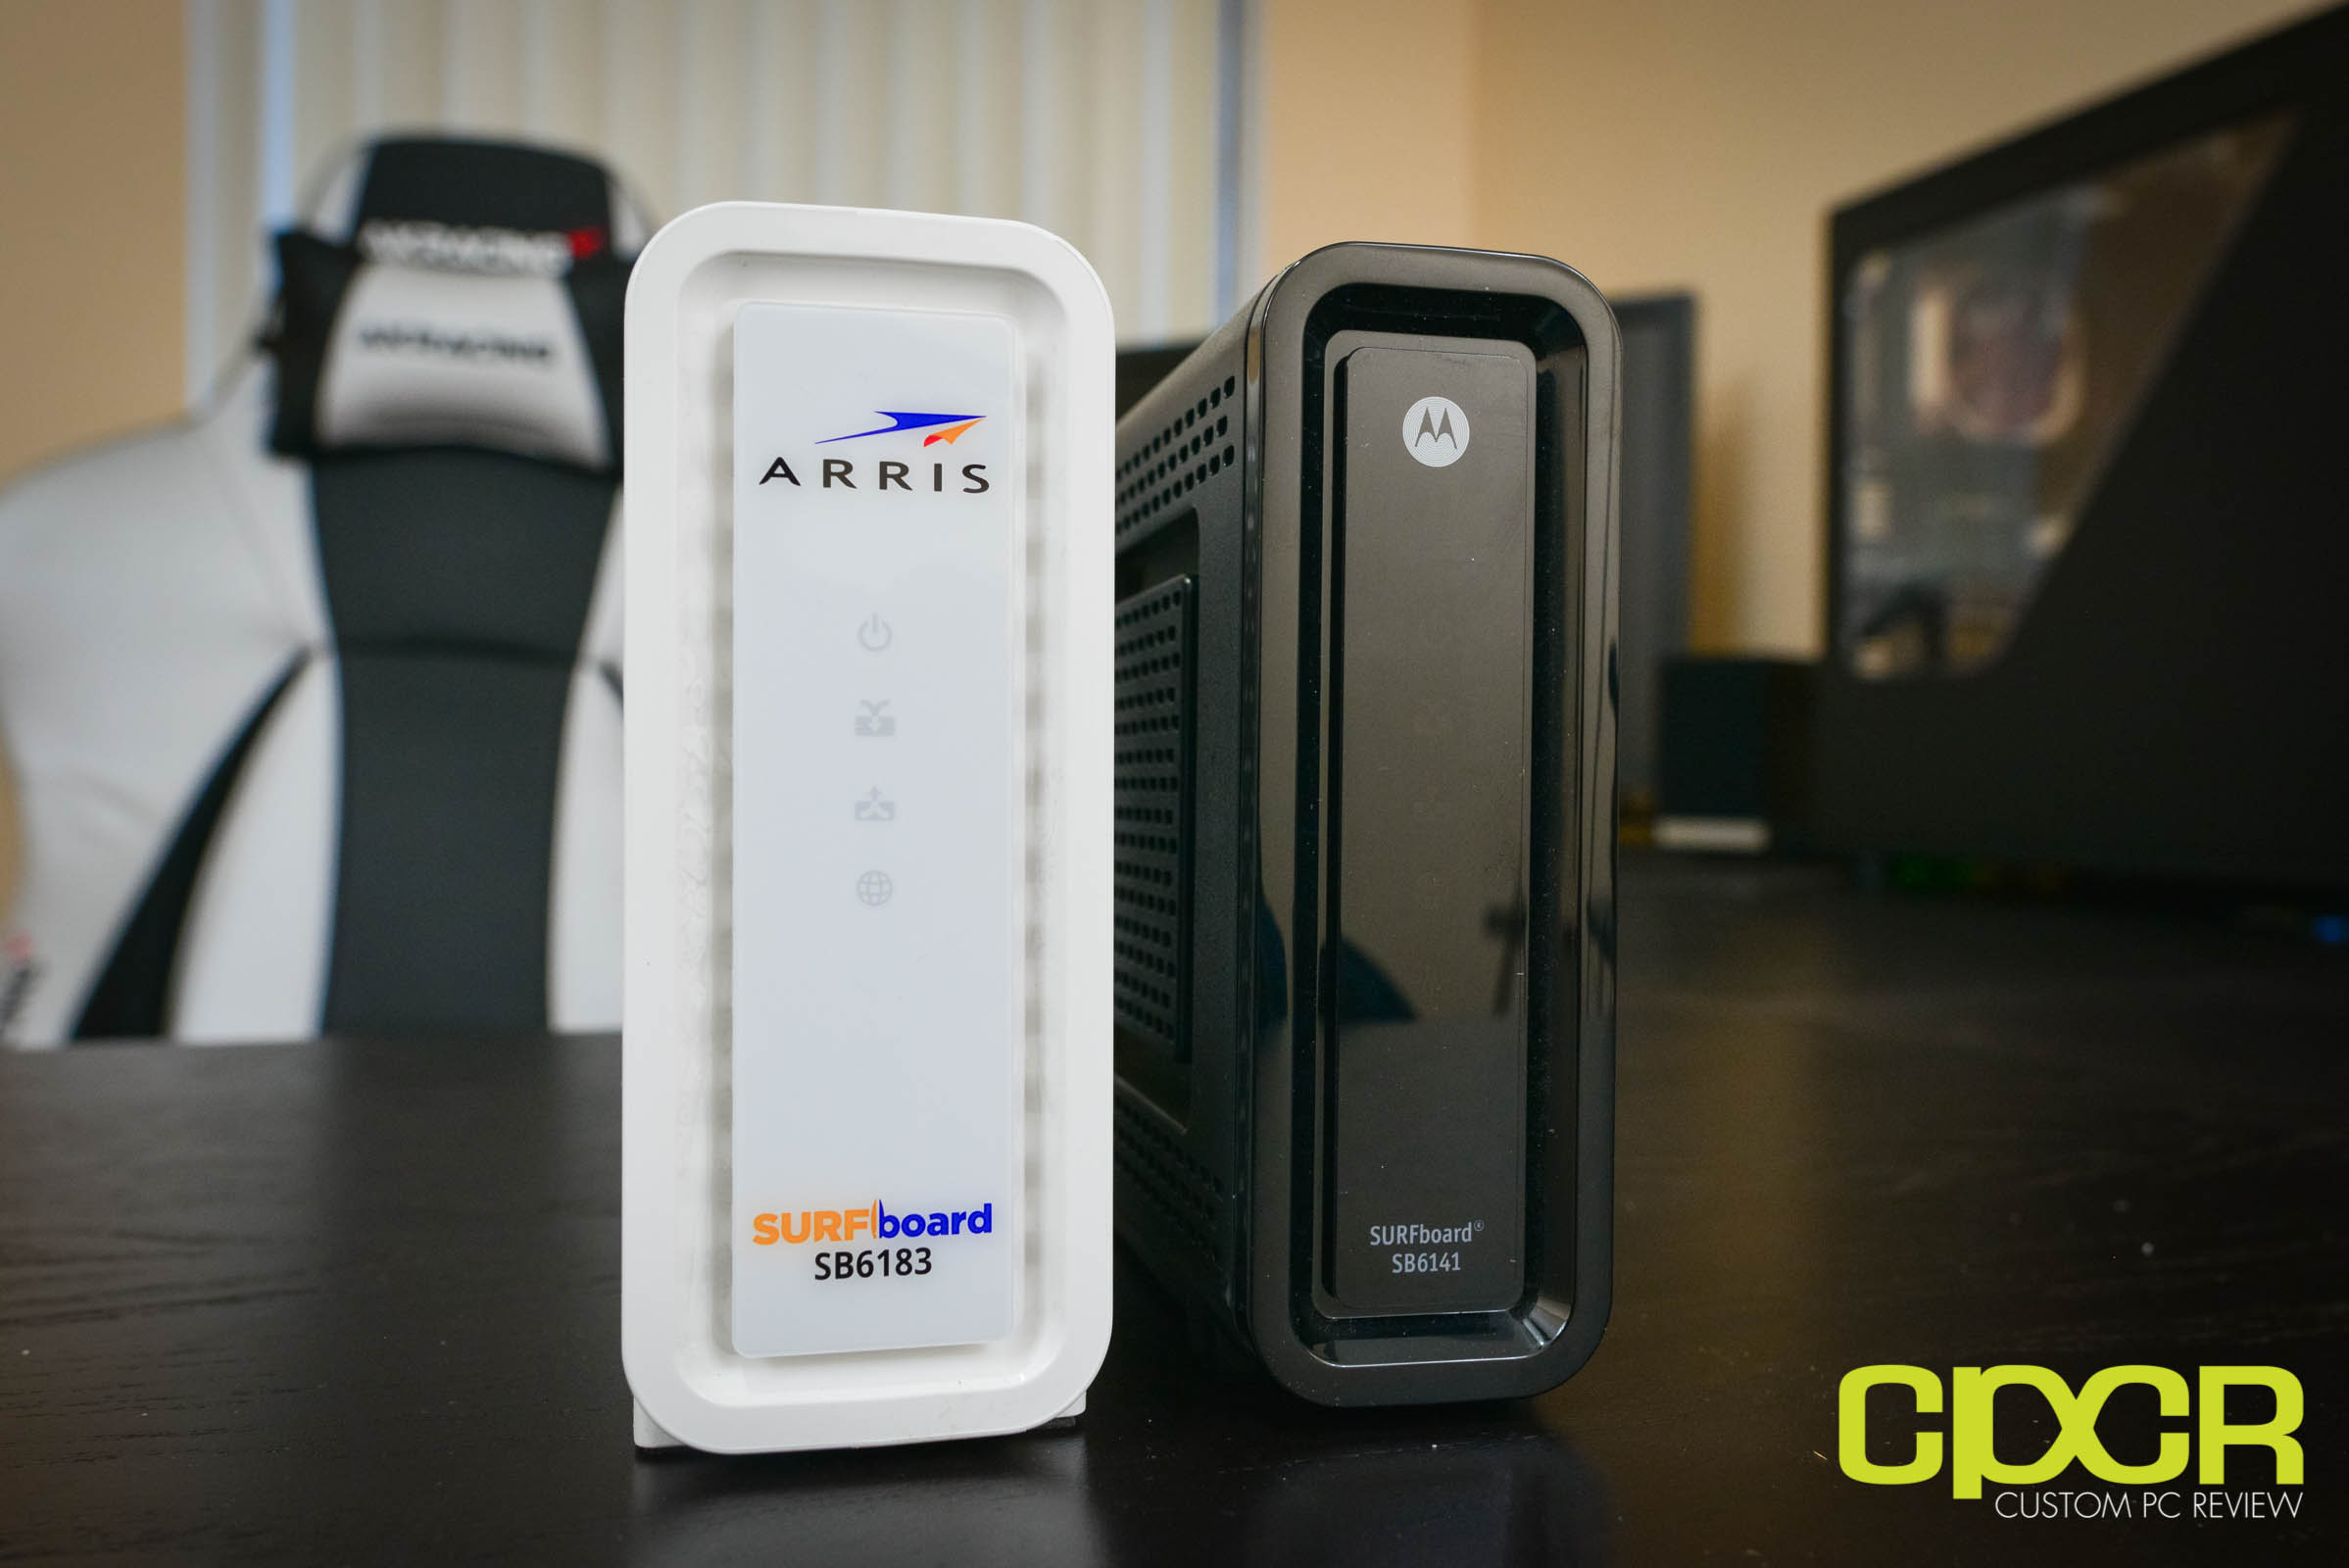 The Best Cable Modem of 2019